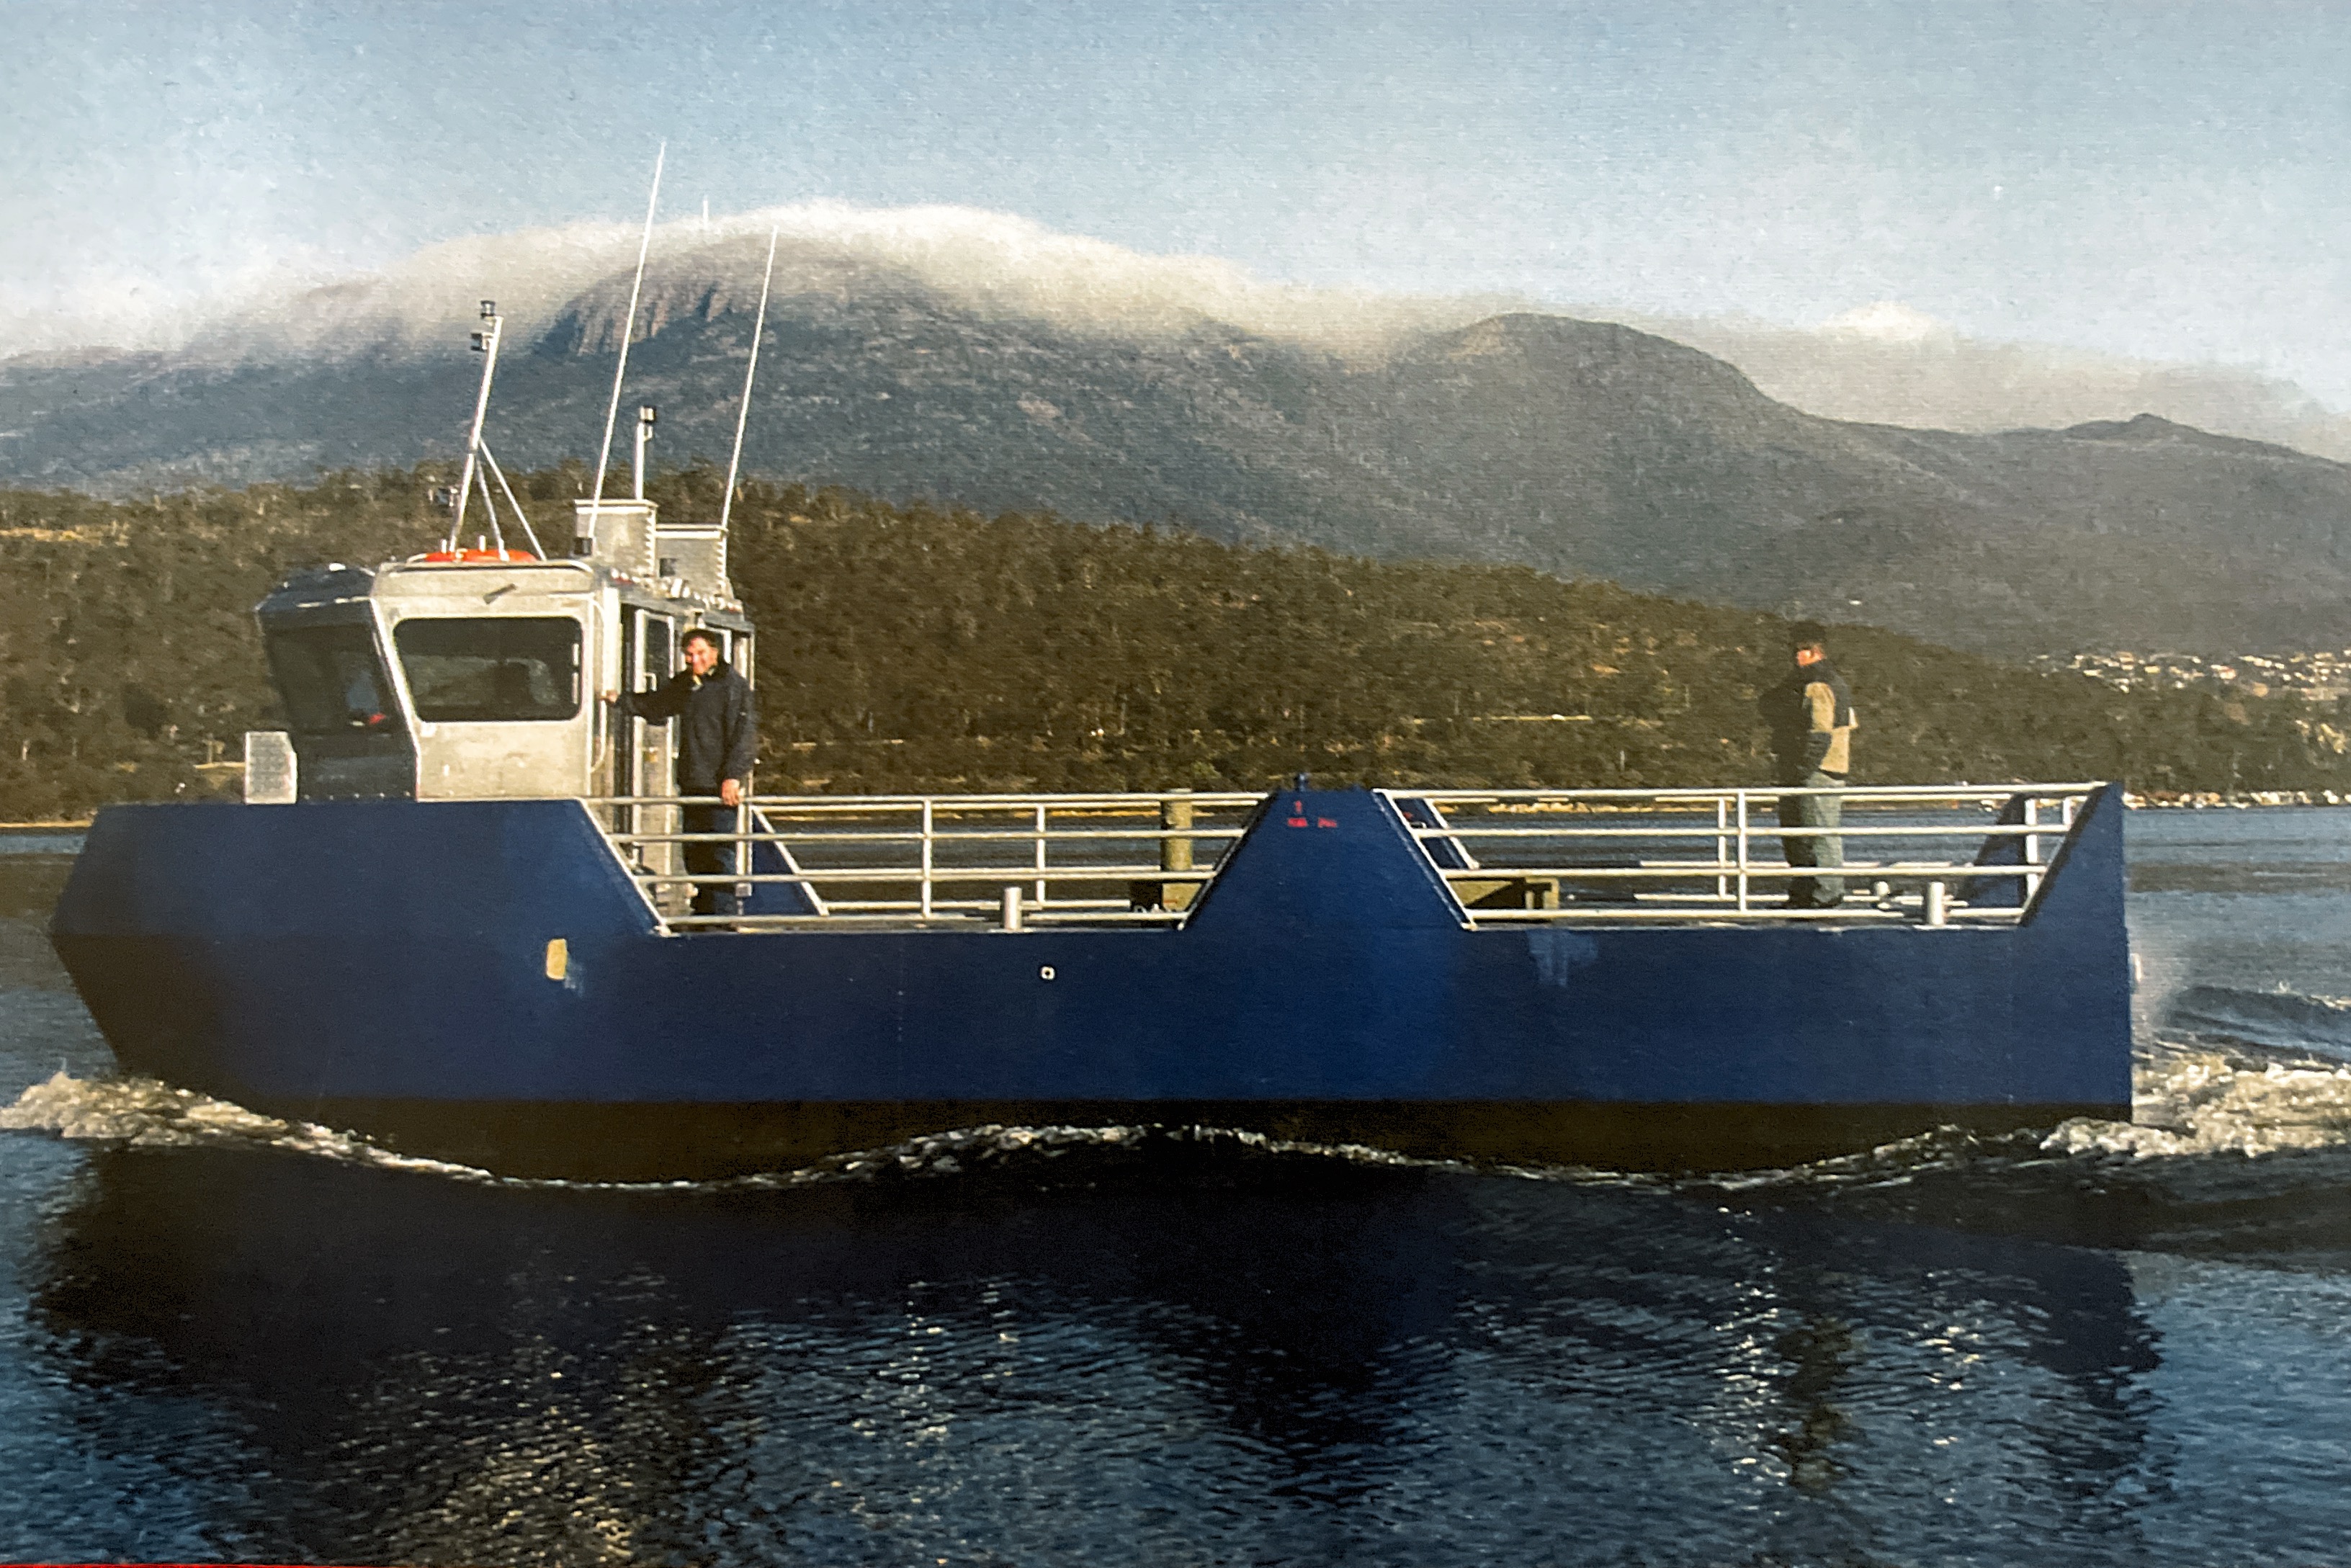 Royal Knight for Tassal built by Sabre Hobart about 2004 for fish farm